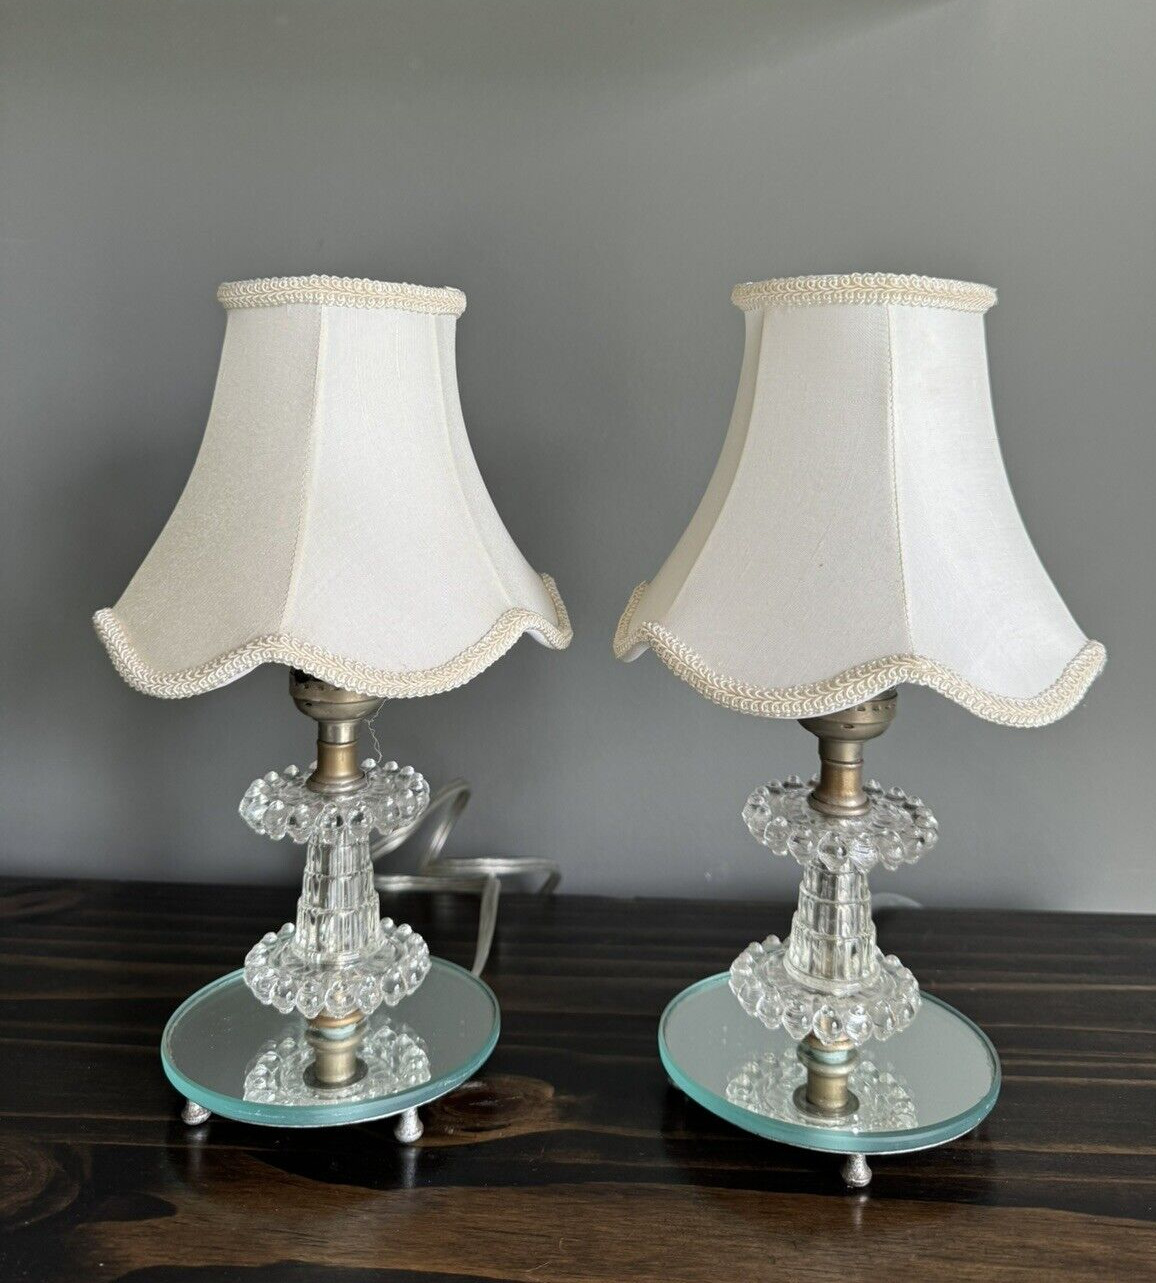 PAIR Vintage Small Boudoir Table Lamps Molded Glass Candlewick Style w/Shade